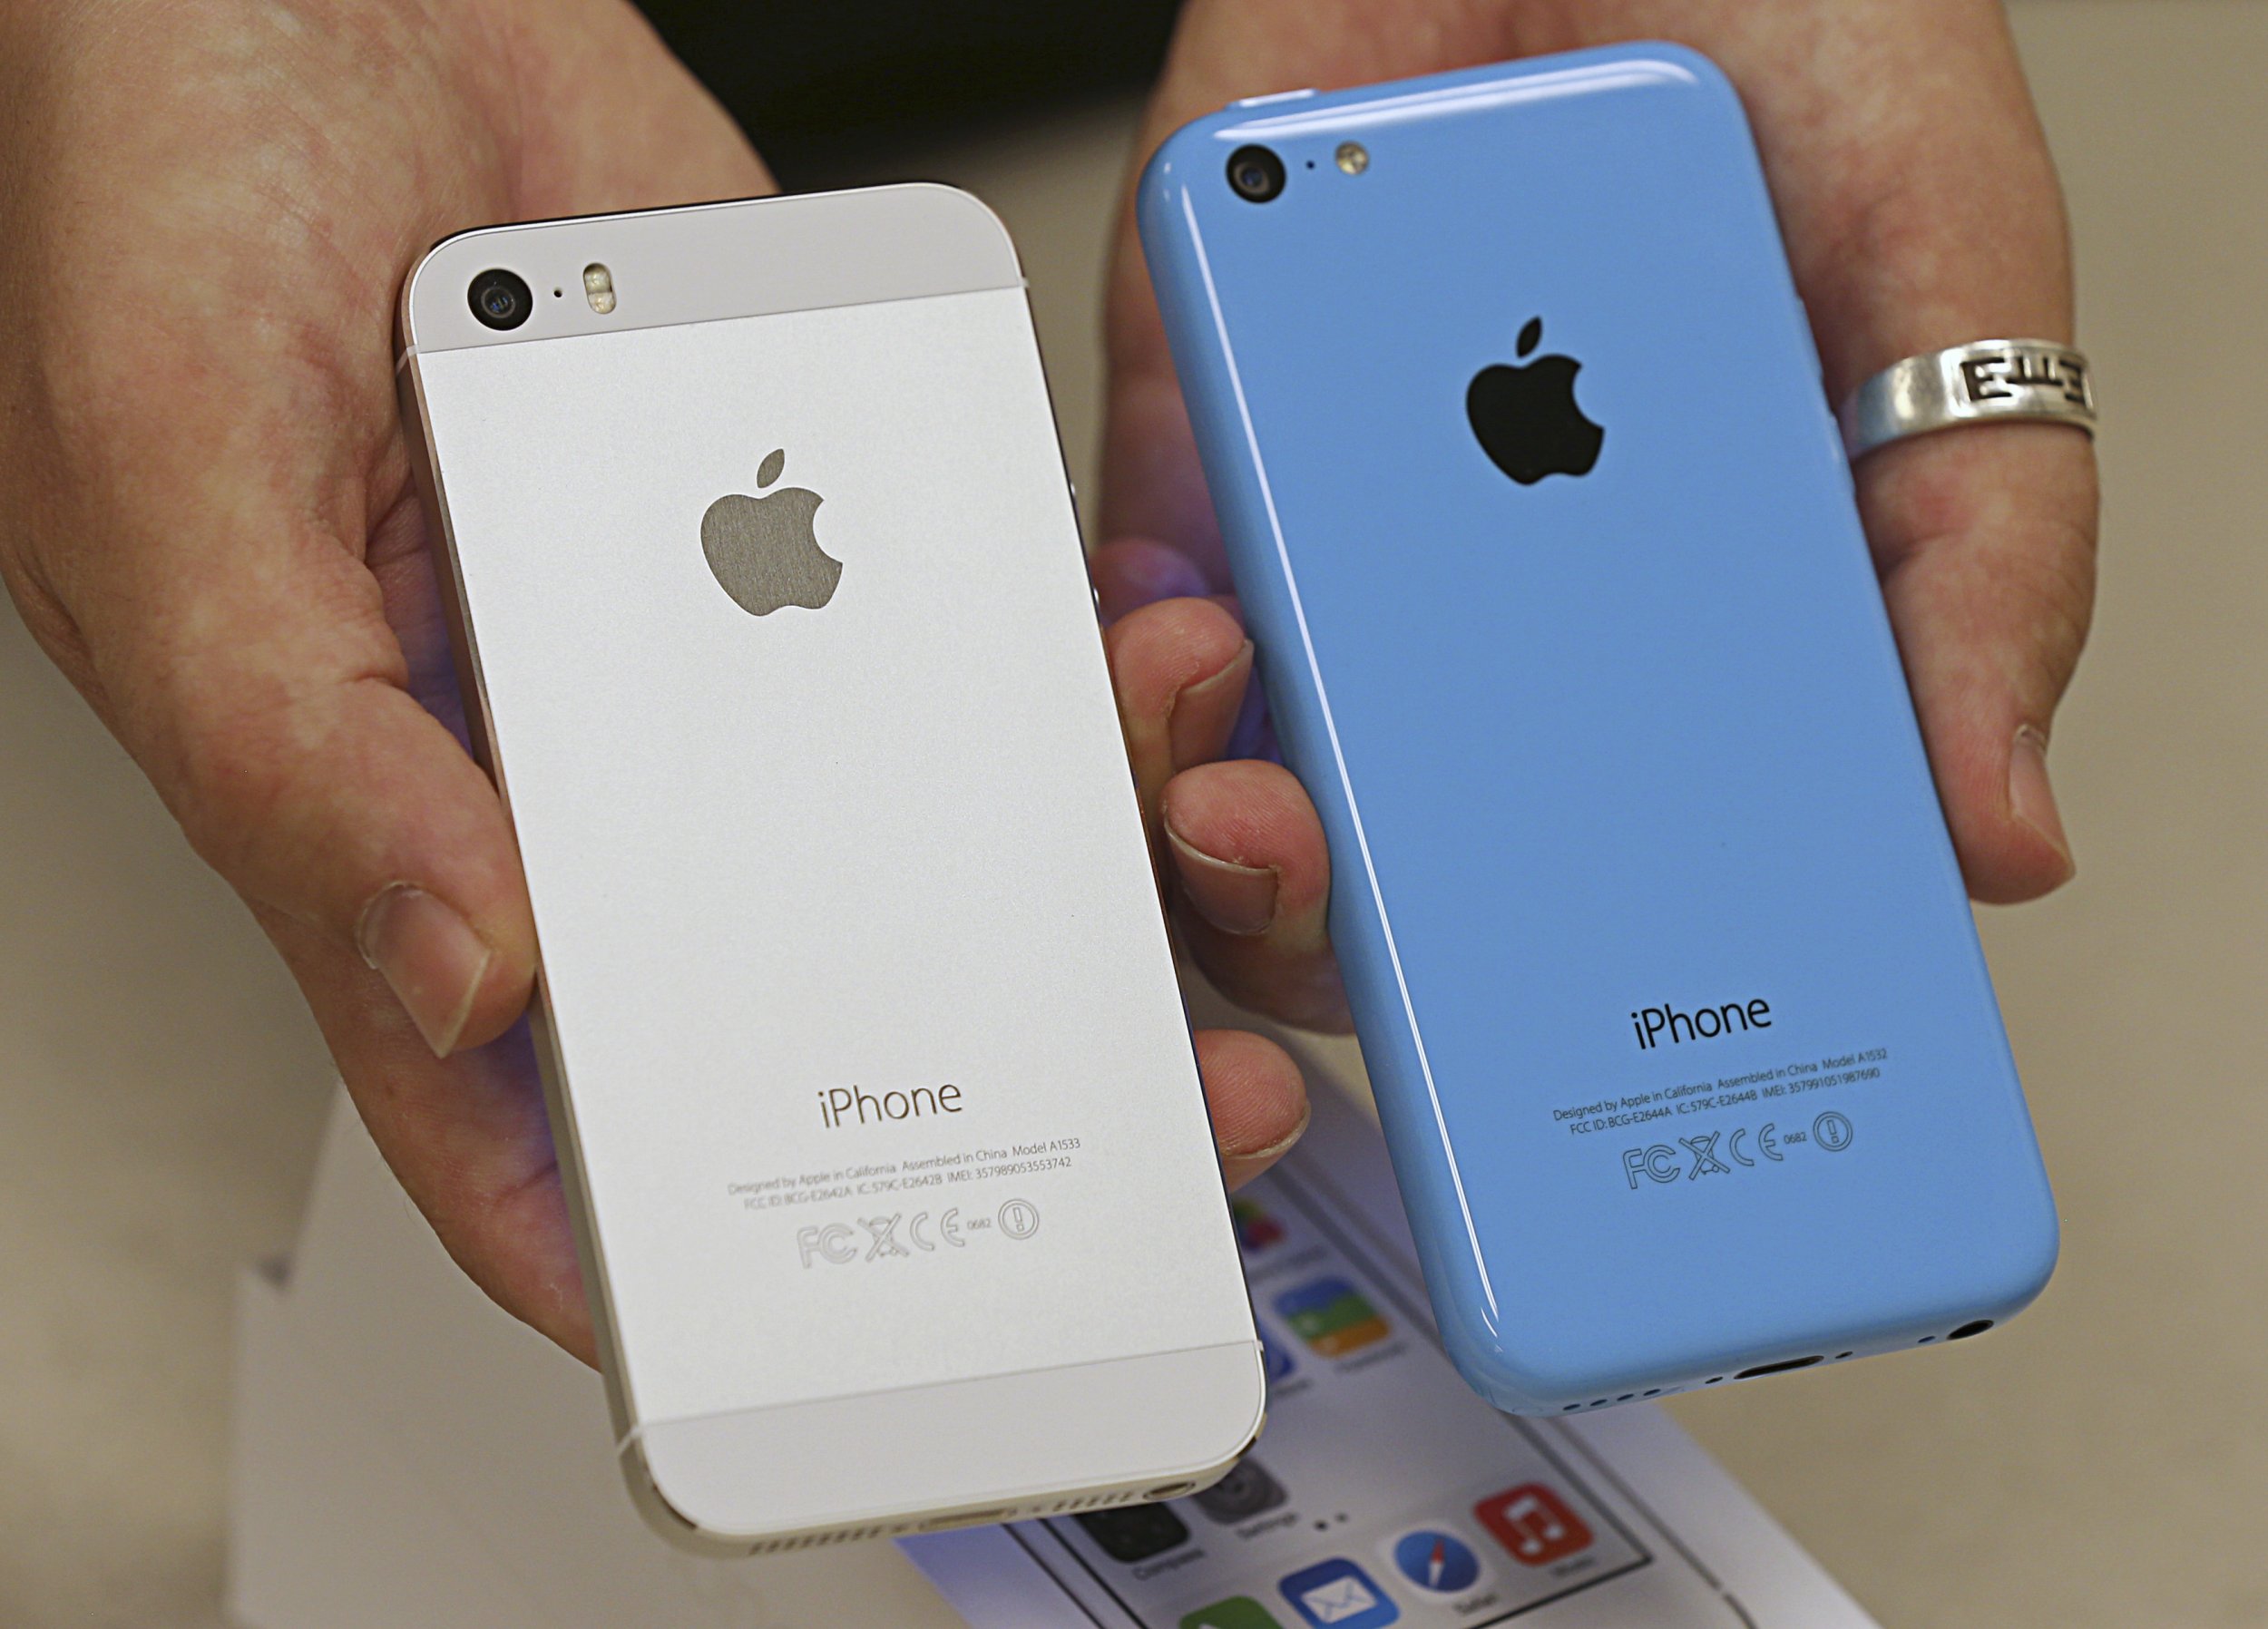 Apple Iphone 5s Release Date Arrives New Models Could Fuel 28 Jump In Q3 Sales